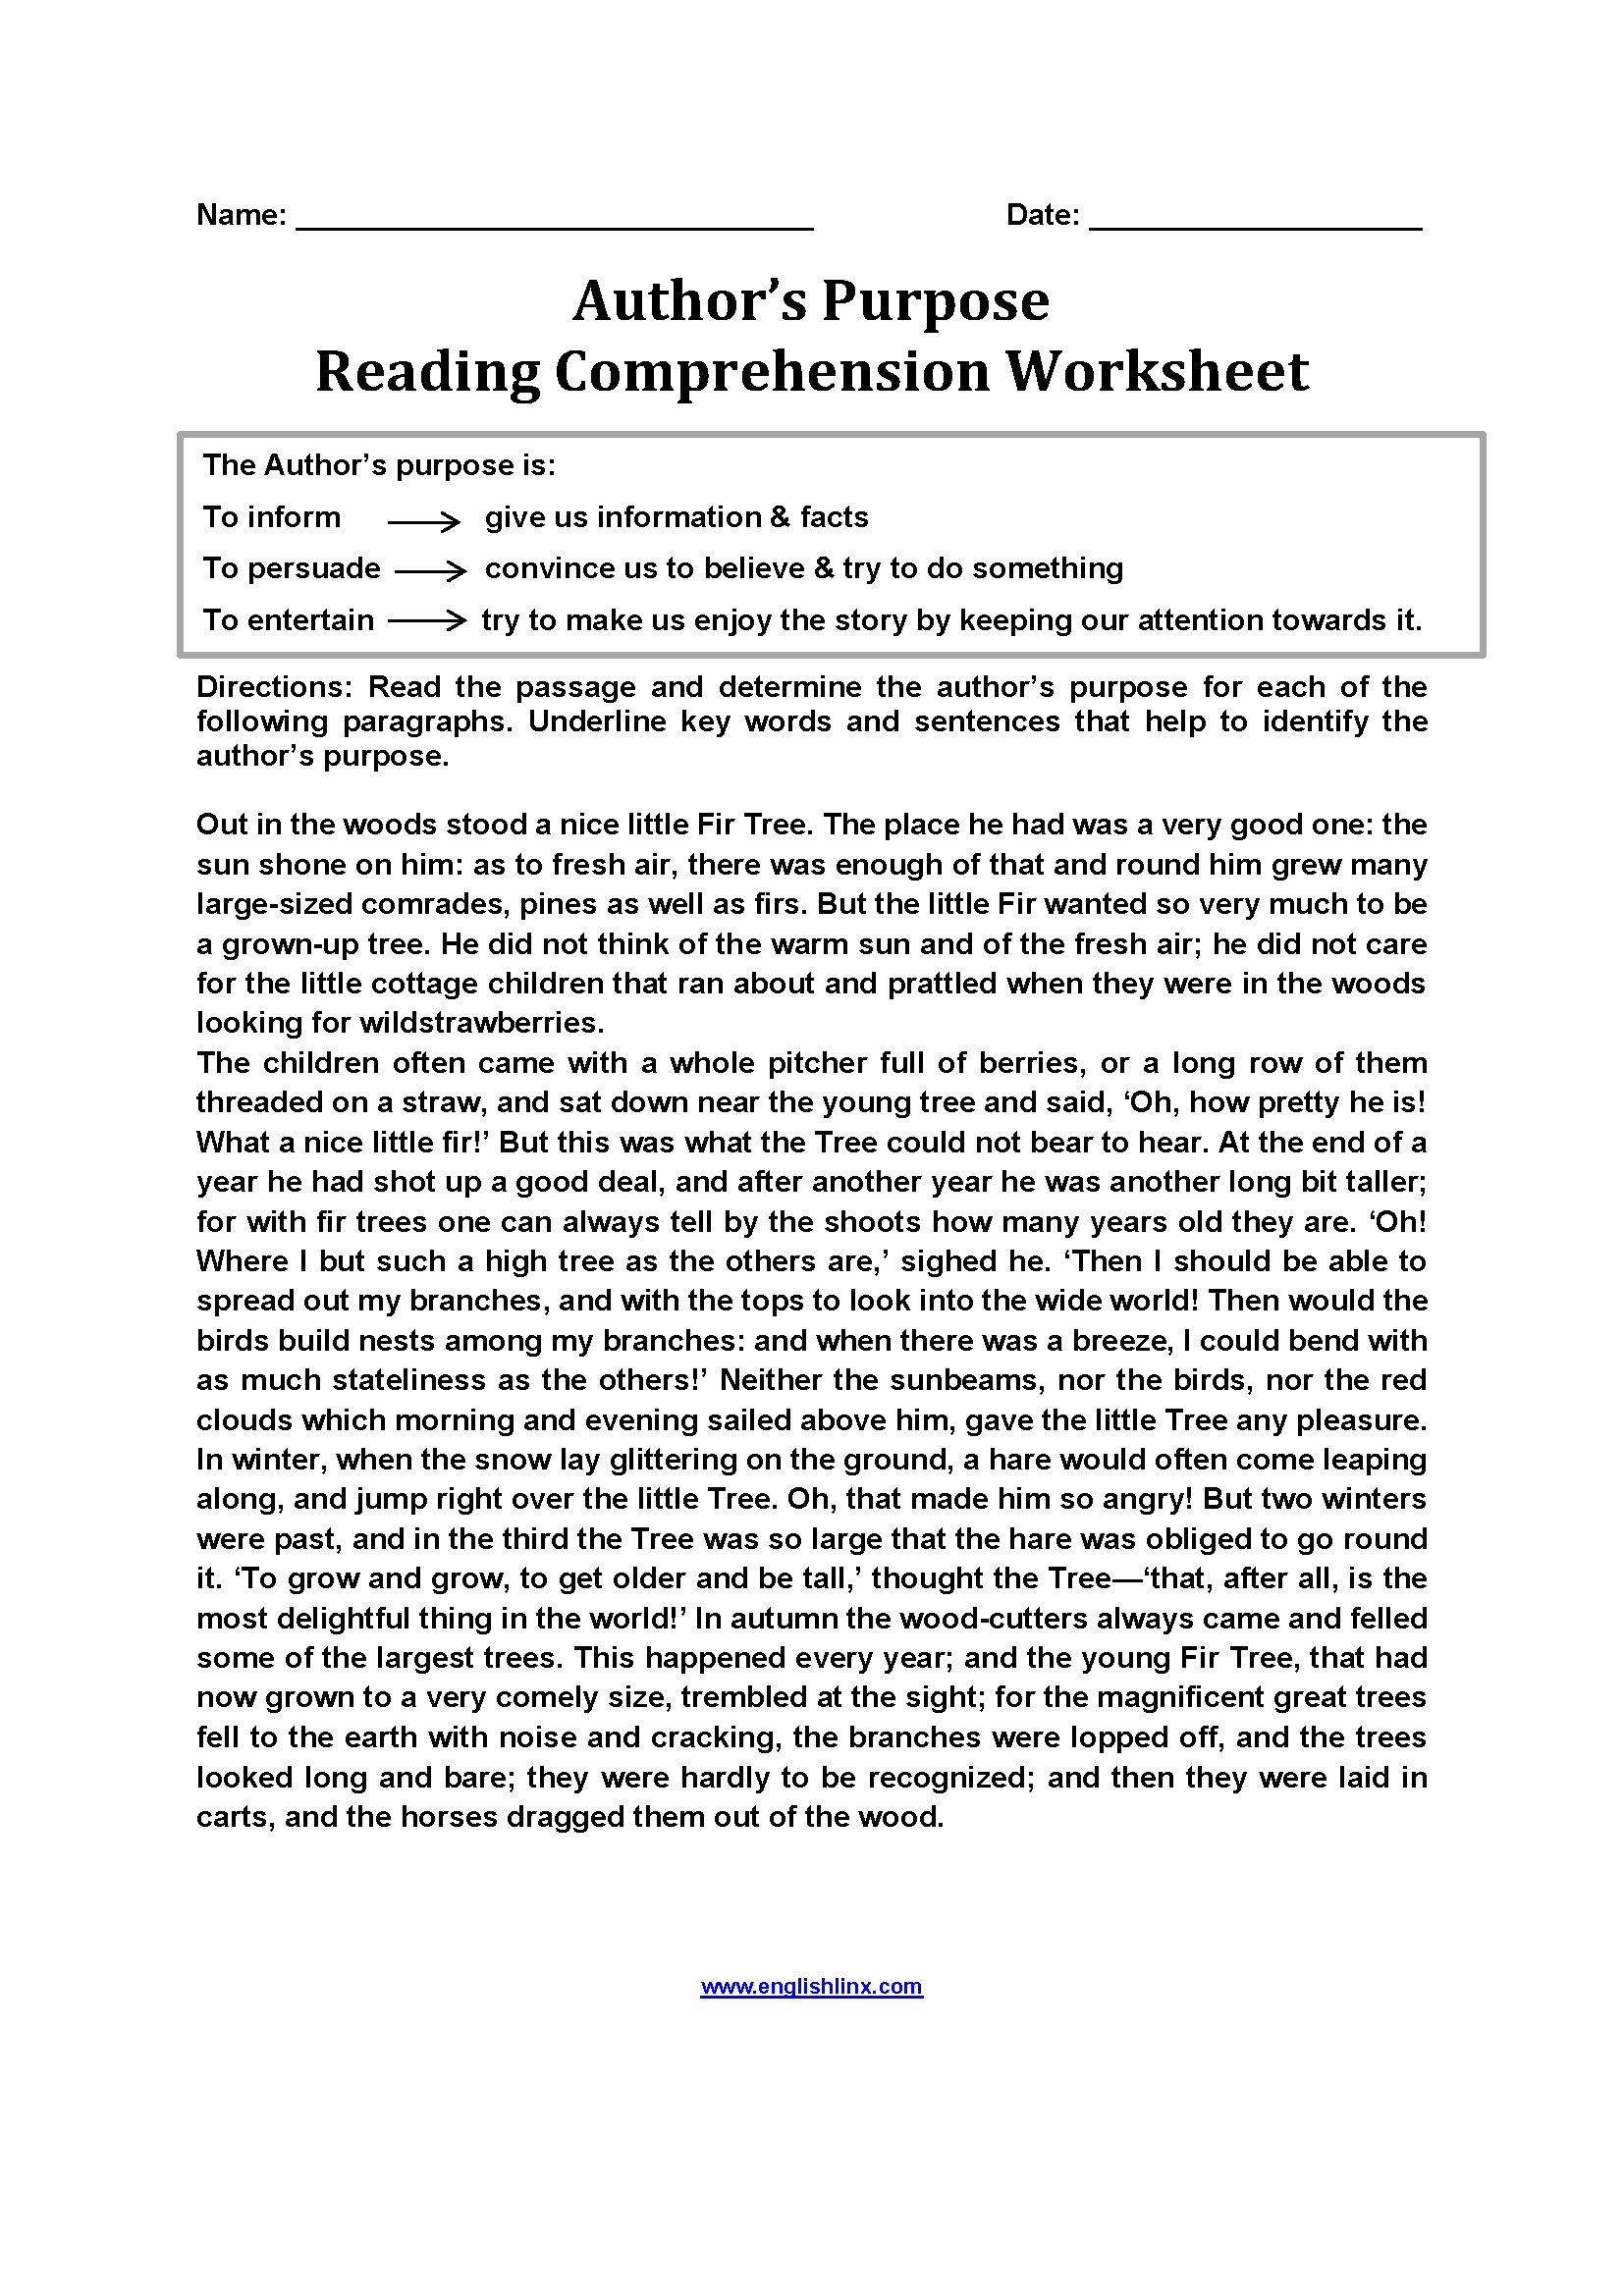 Reading for Author's Purpose Worksheets